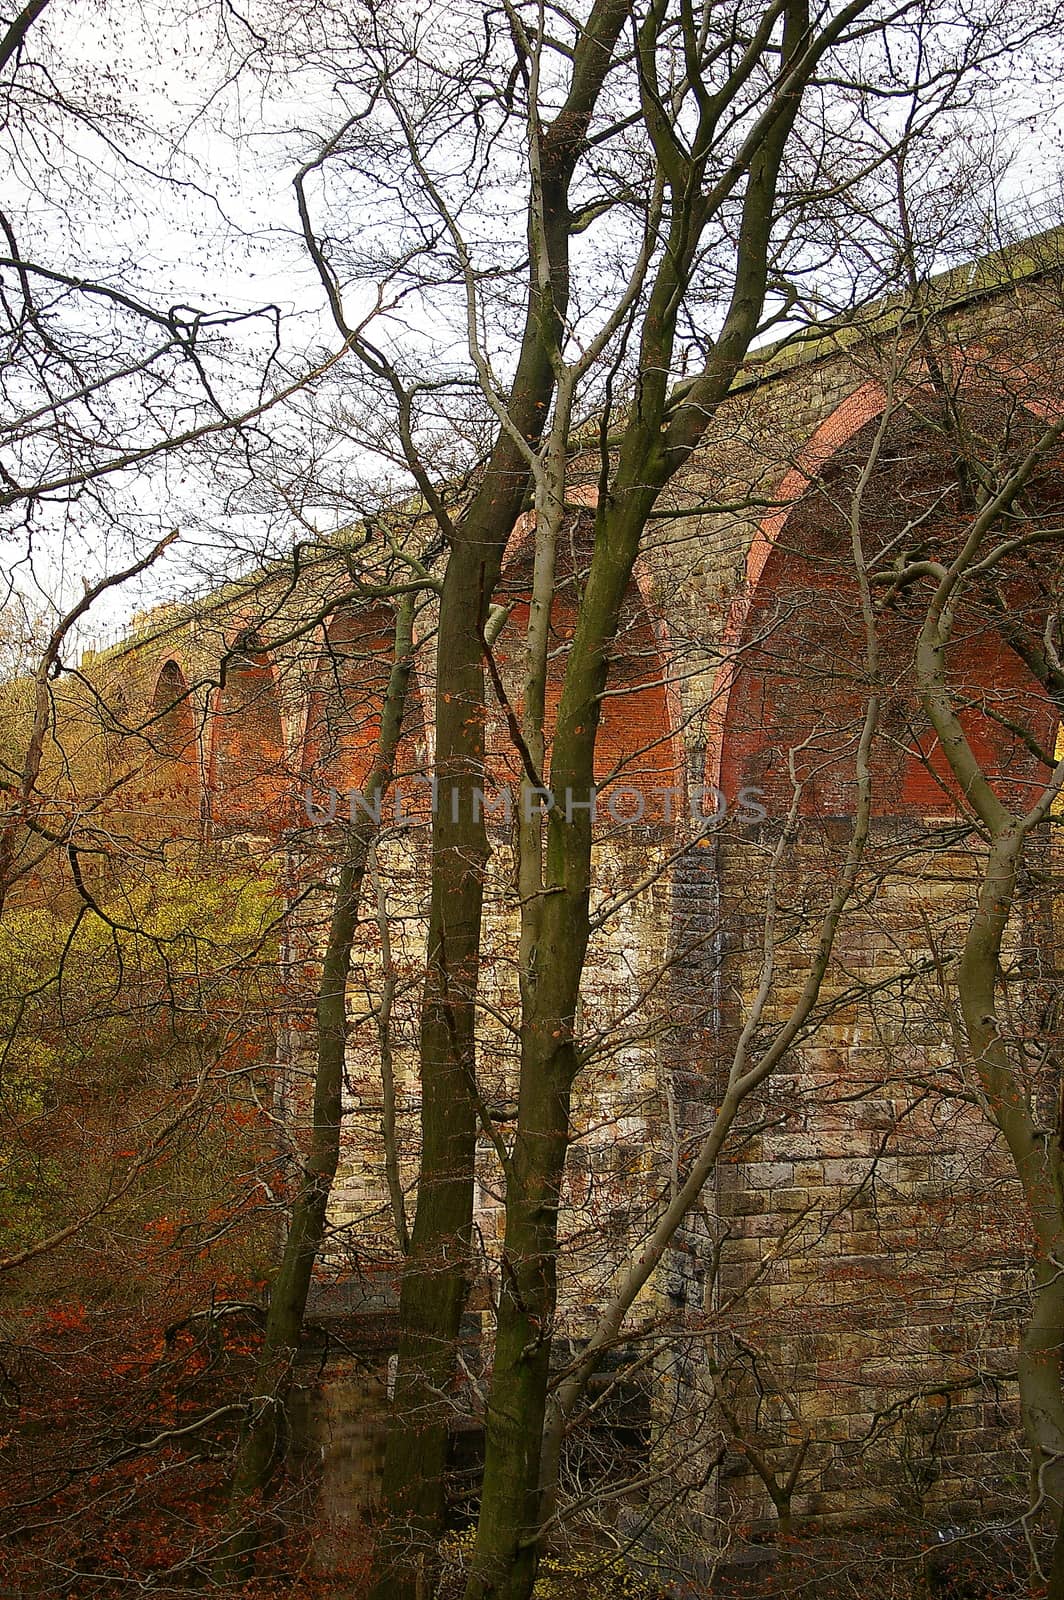 Trees in front of a railway viaduct with arches spanning a reservoir